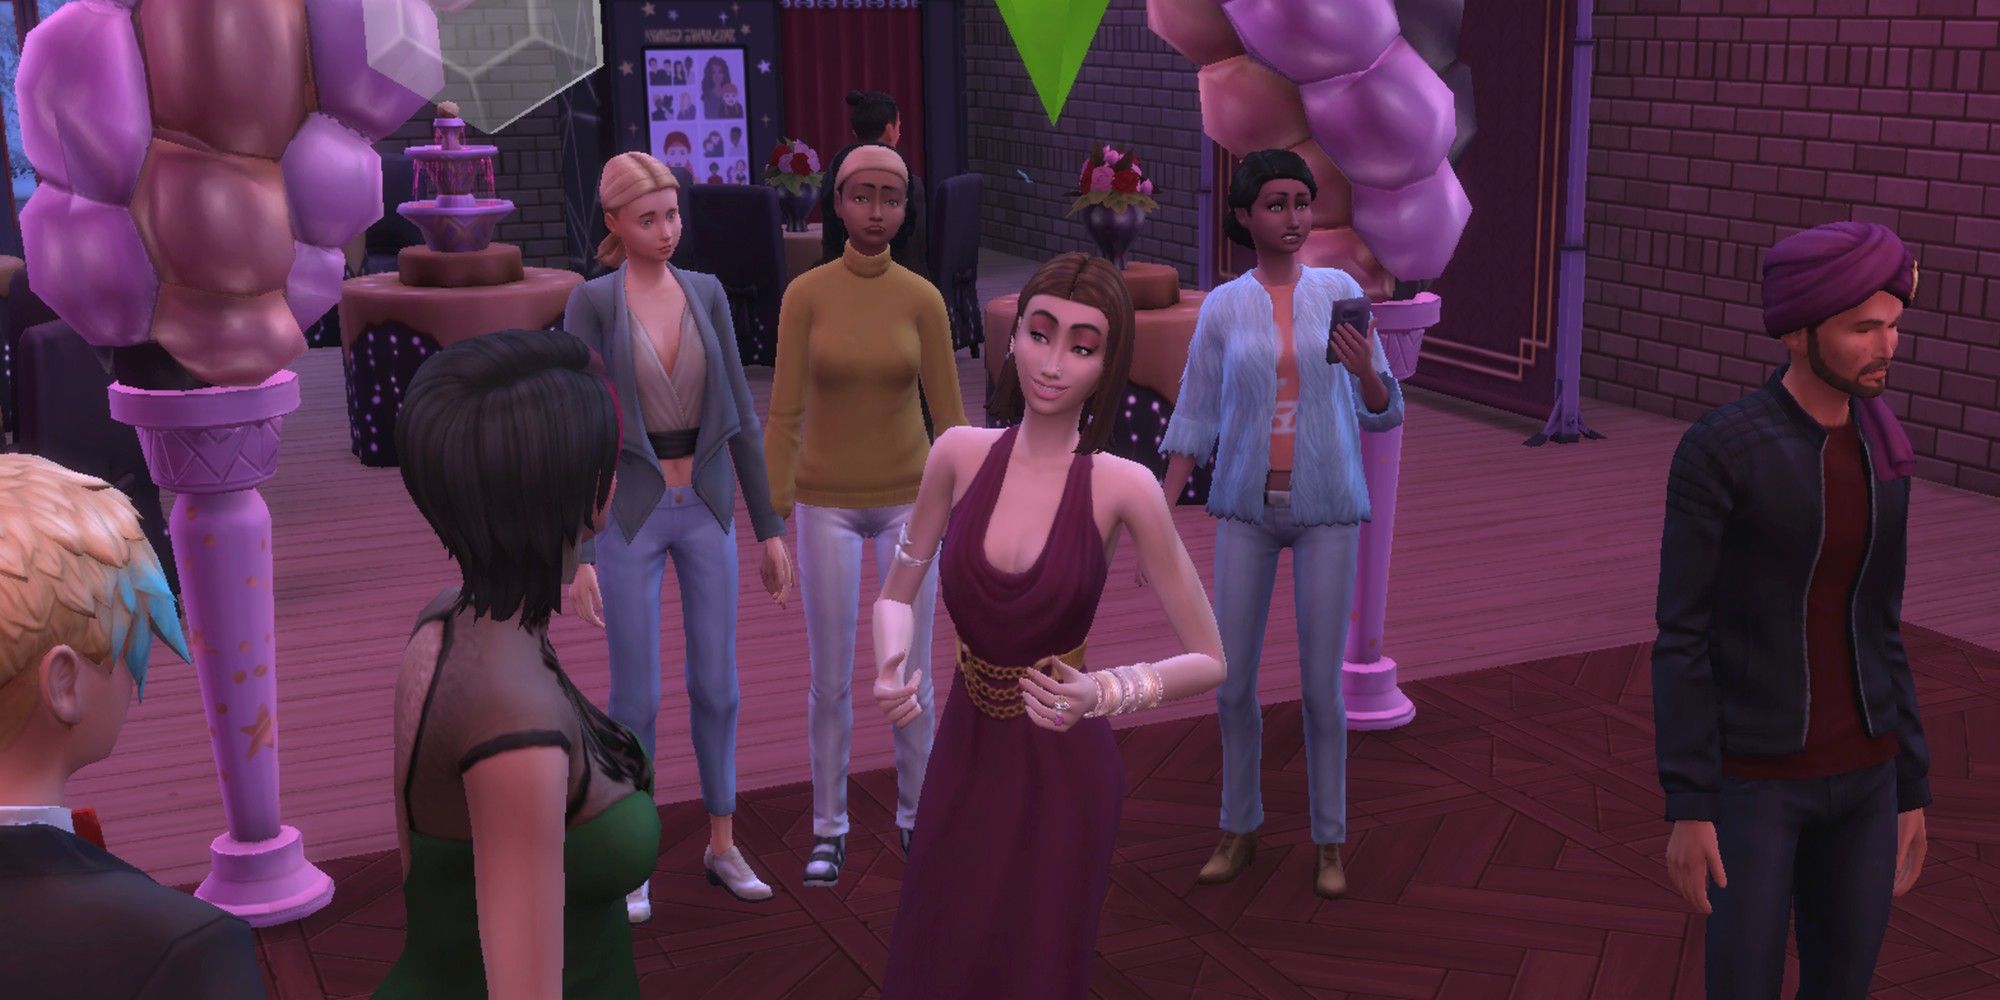 the sims 4 high school years expansion pack prom dancing outfit drink dance floor